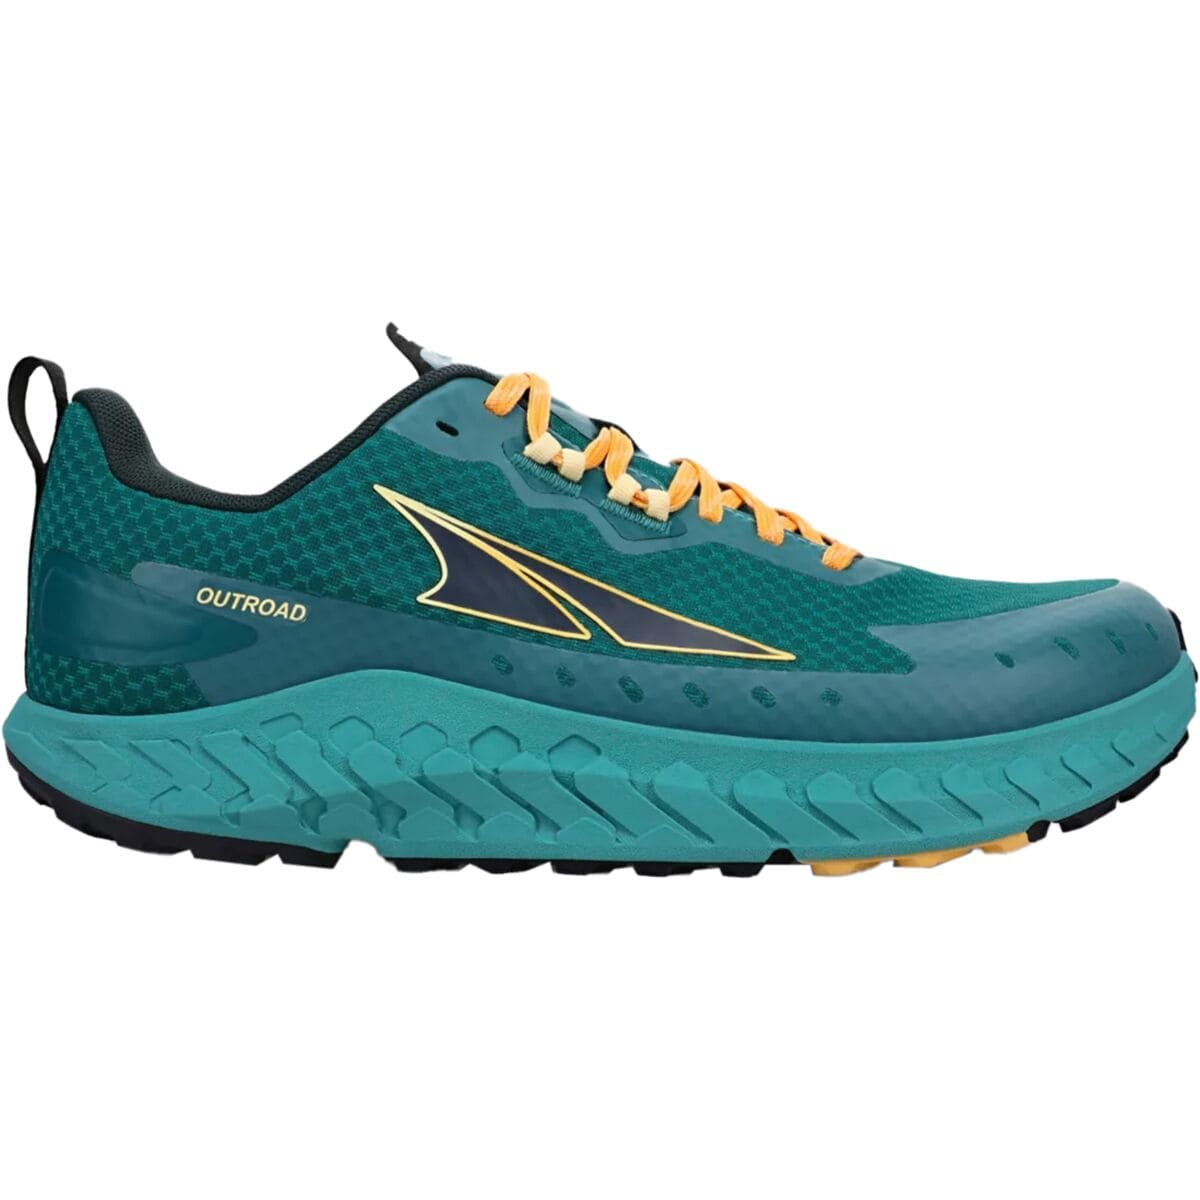 Outroad Trail Running Shoe - Men